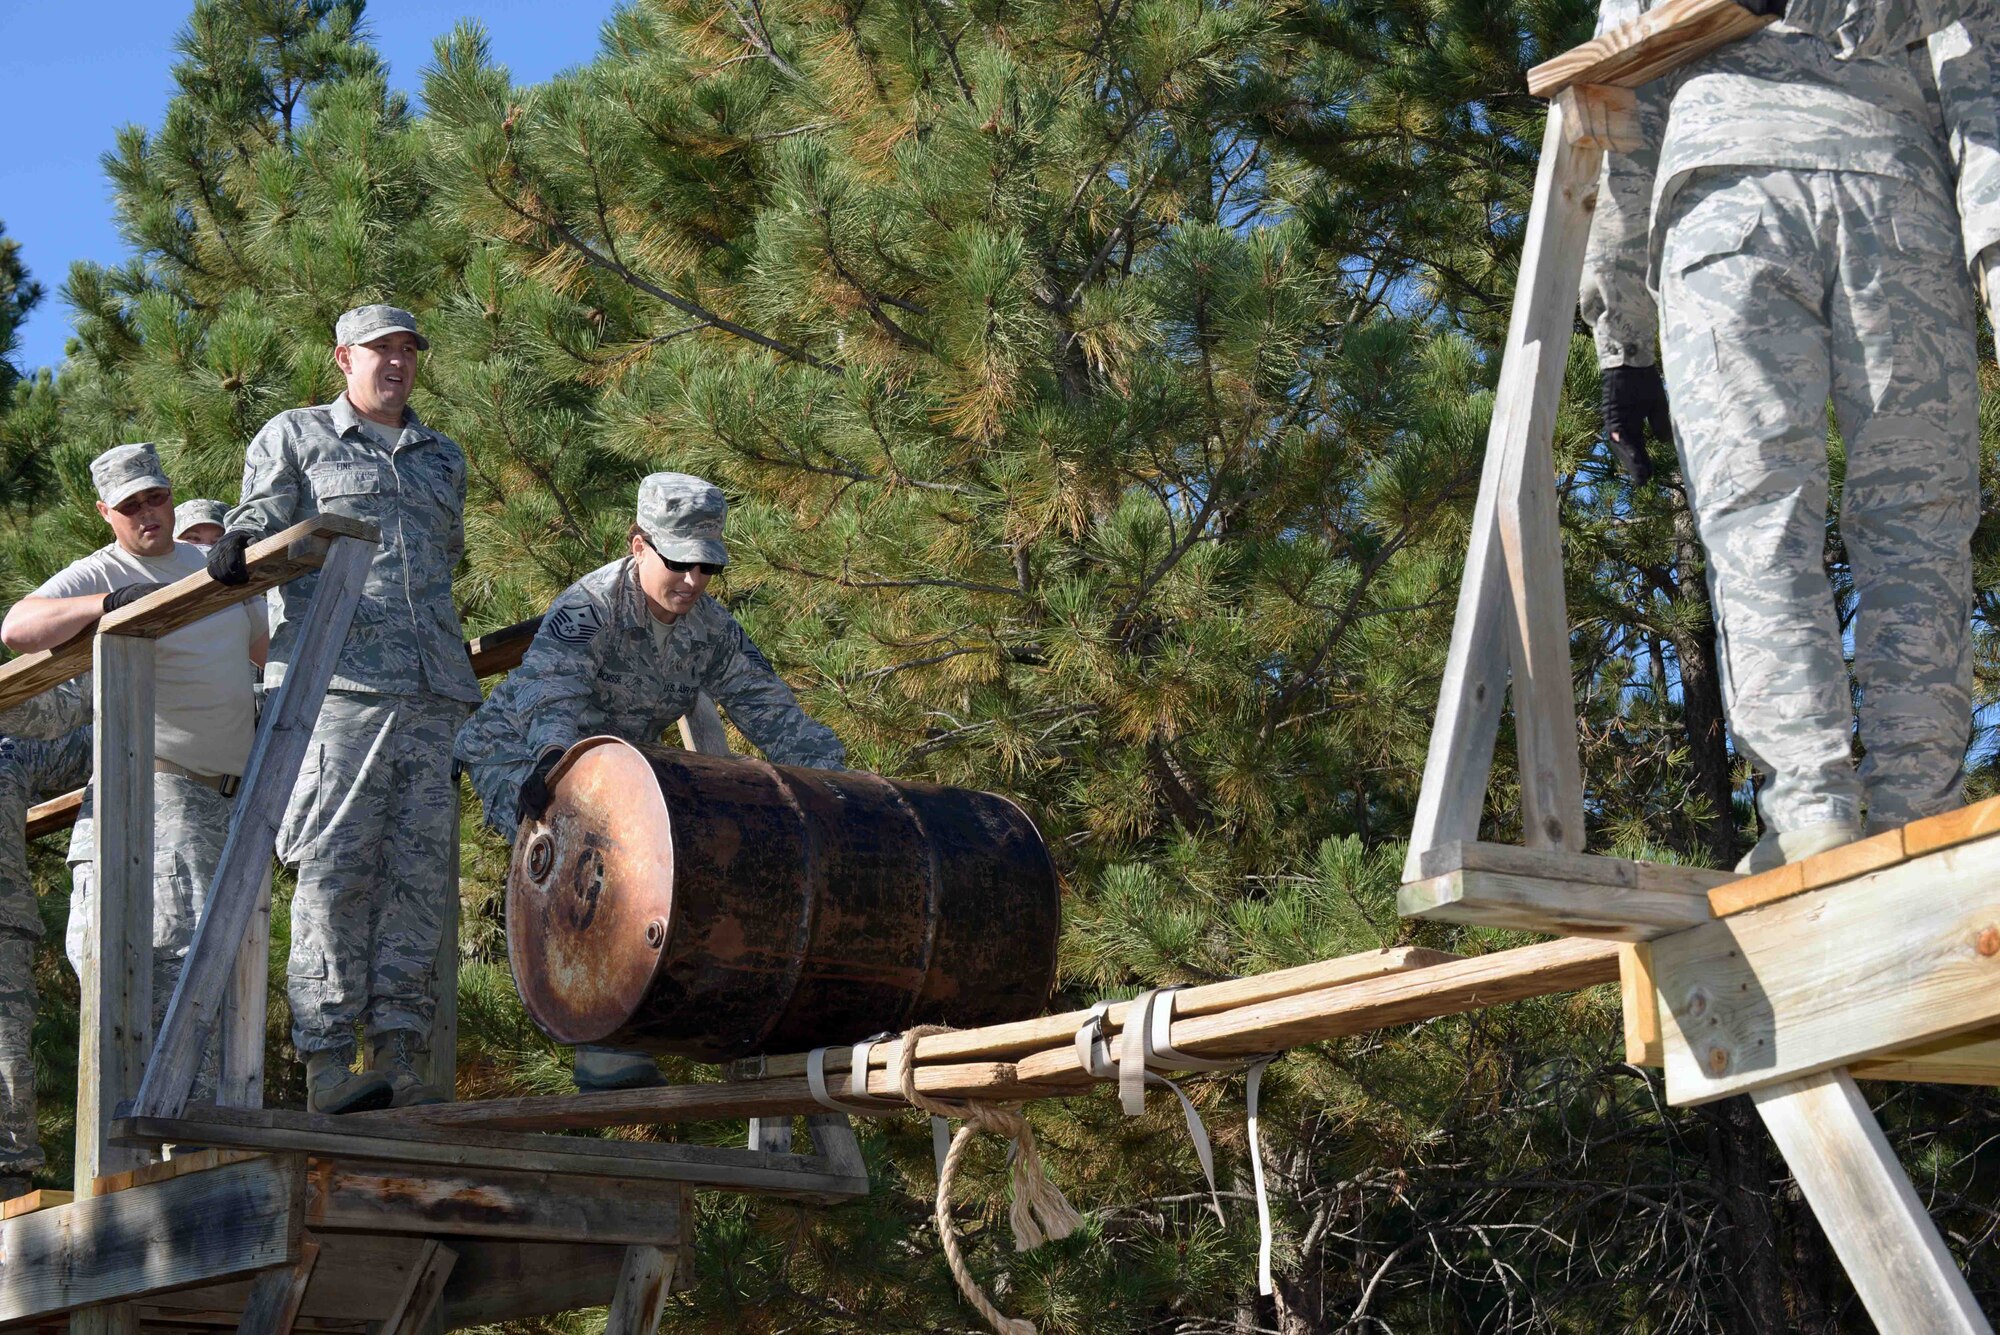 Master Sgt. Kellie Boisse, the first sergeant assigned to the 28th Logistics Readiness Squadron, rolls a barrel across a makeshift bridge during a Leadership Reaction Course at the South Dakota National Guard West Camp Rapid training facility, Rapid City, S.D., Sept. 15, 2016. Some challenges required the participants to not only get themselves across, but also retrieve the gear they utilized. (U.S. Air Force photo by Airman 1st Class Donald C. Knechtel)